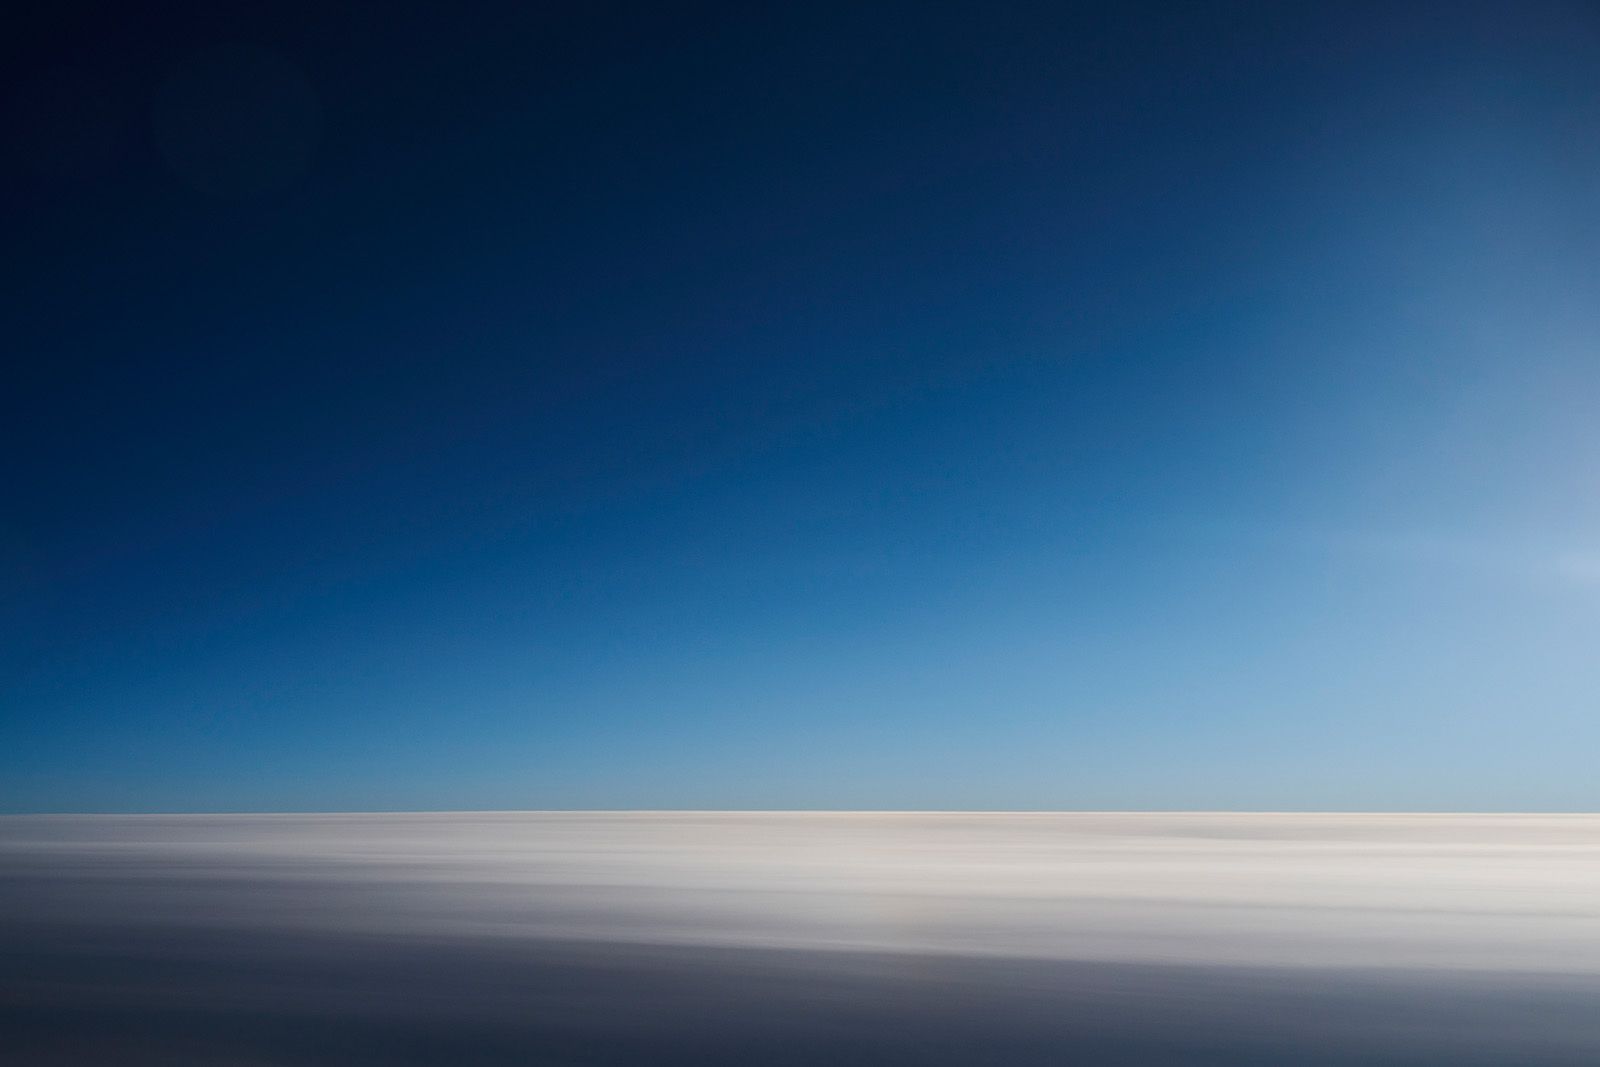 Abstraction of sky and clouds at 35,000 feet